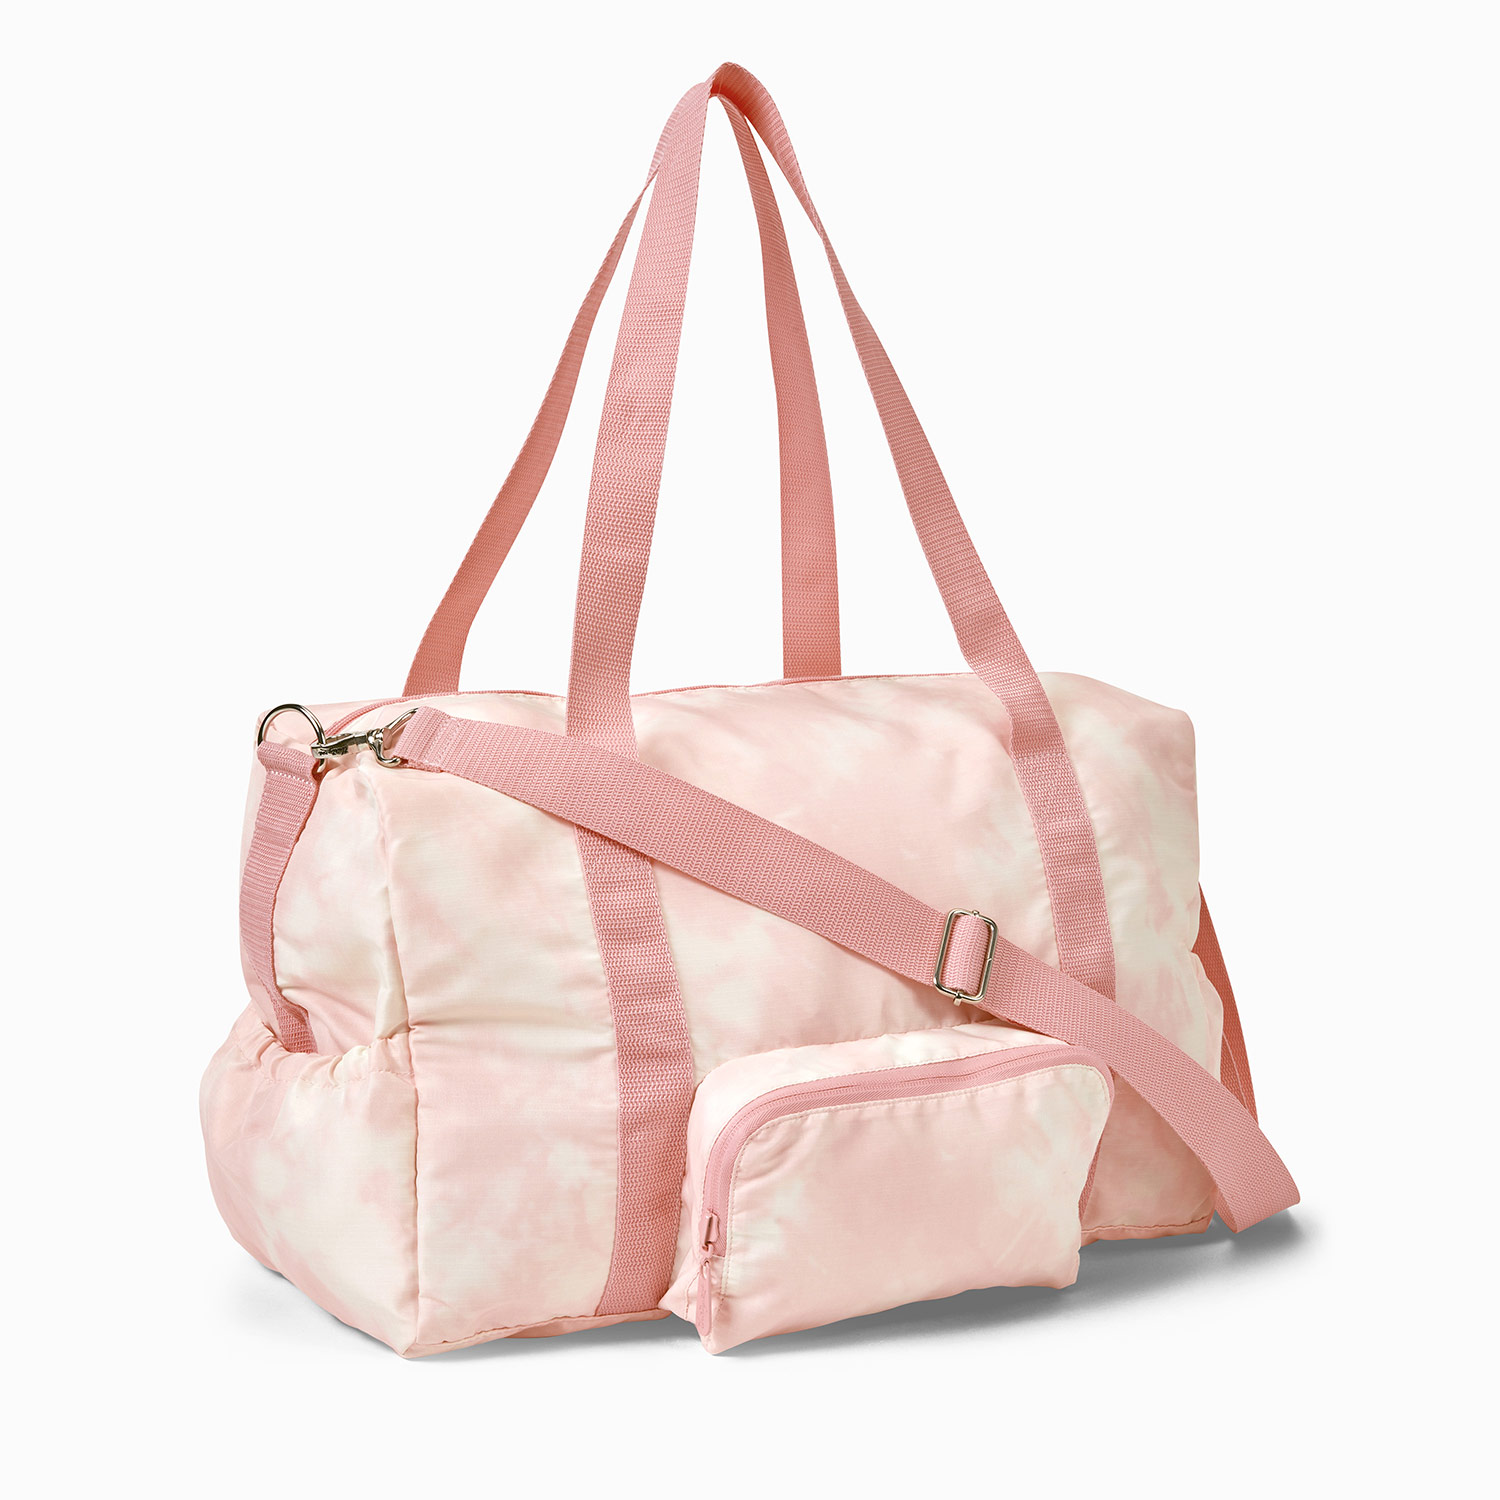 Rose Pink Tie-Dye - Packaway Duffle - Thirty-One Gifts - Affordable Purses,  Totes & Bags